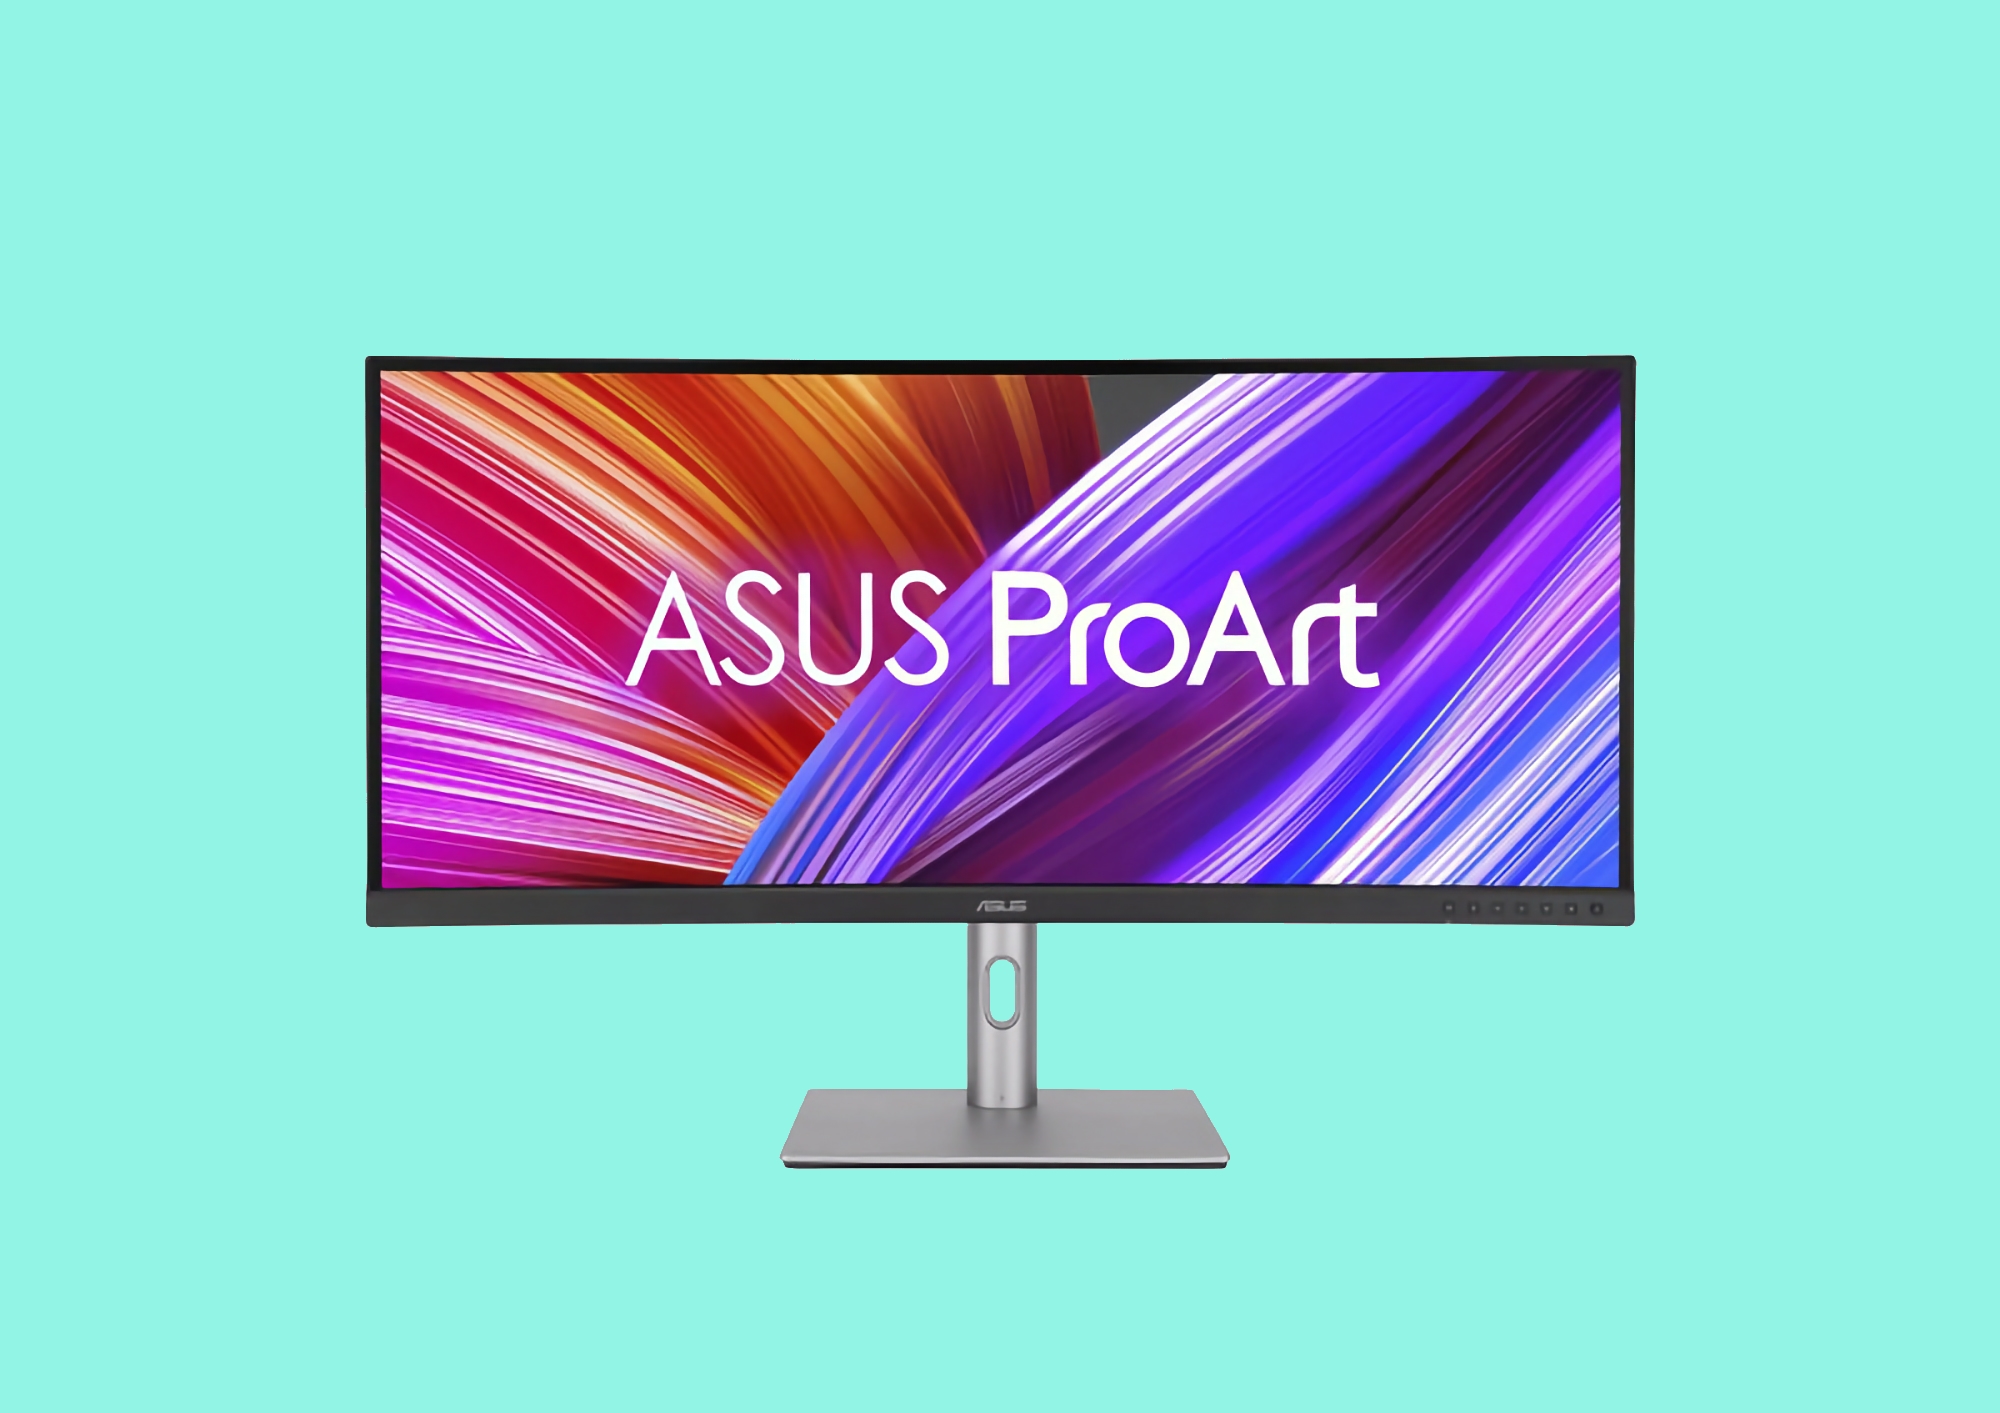 ASUS has announced the ProArt PA34VCNV monitor with a 34.1-inch isonut IPS display and a price tag of $529